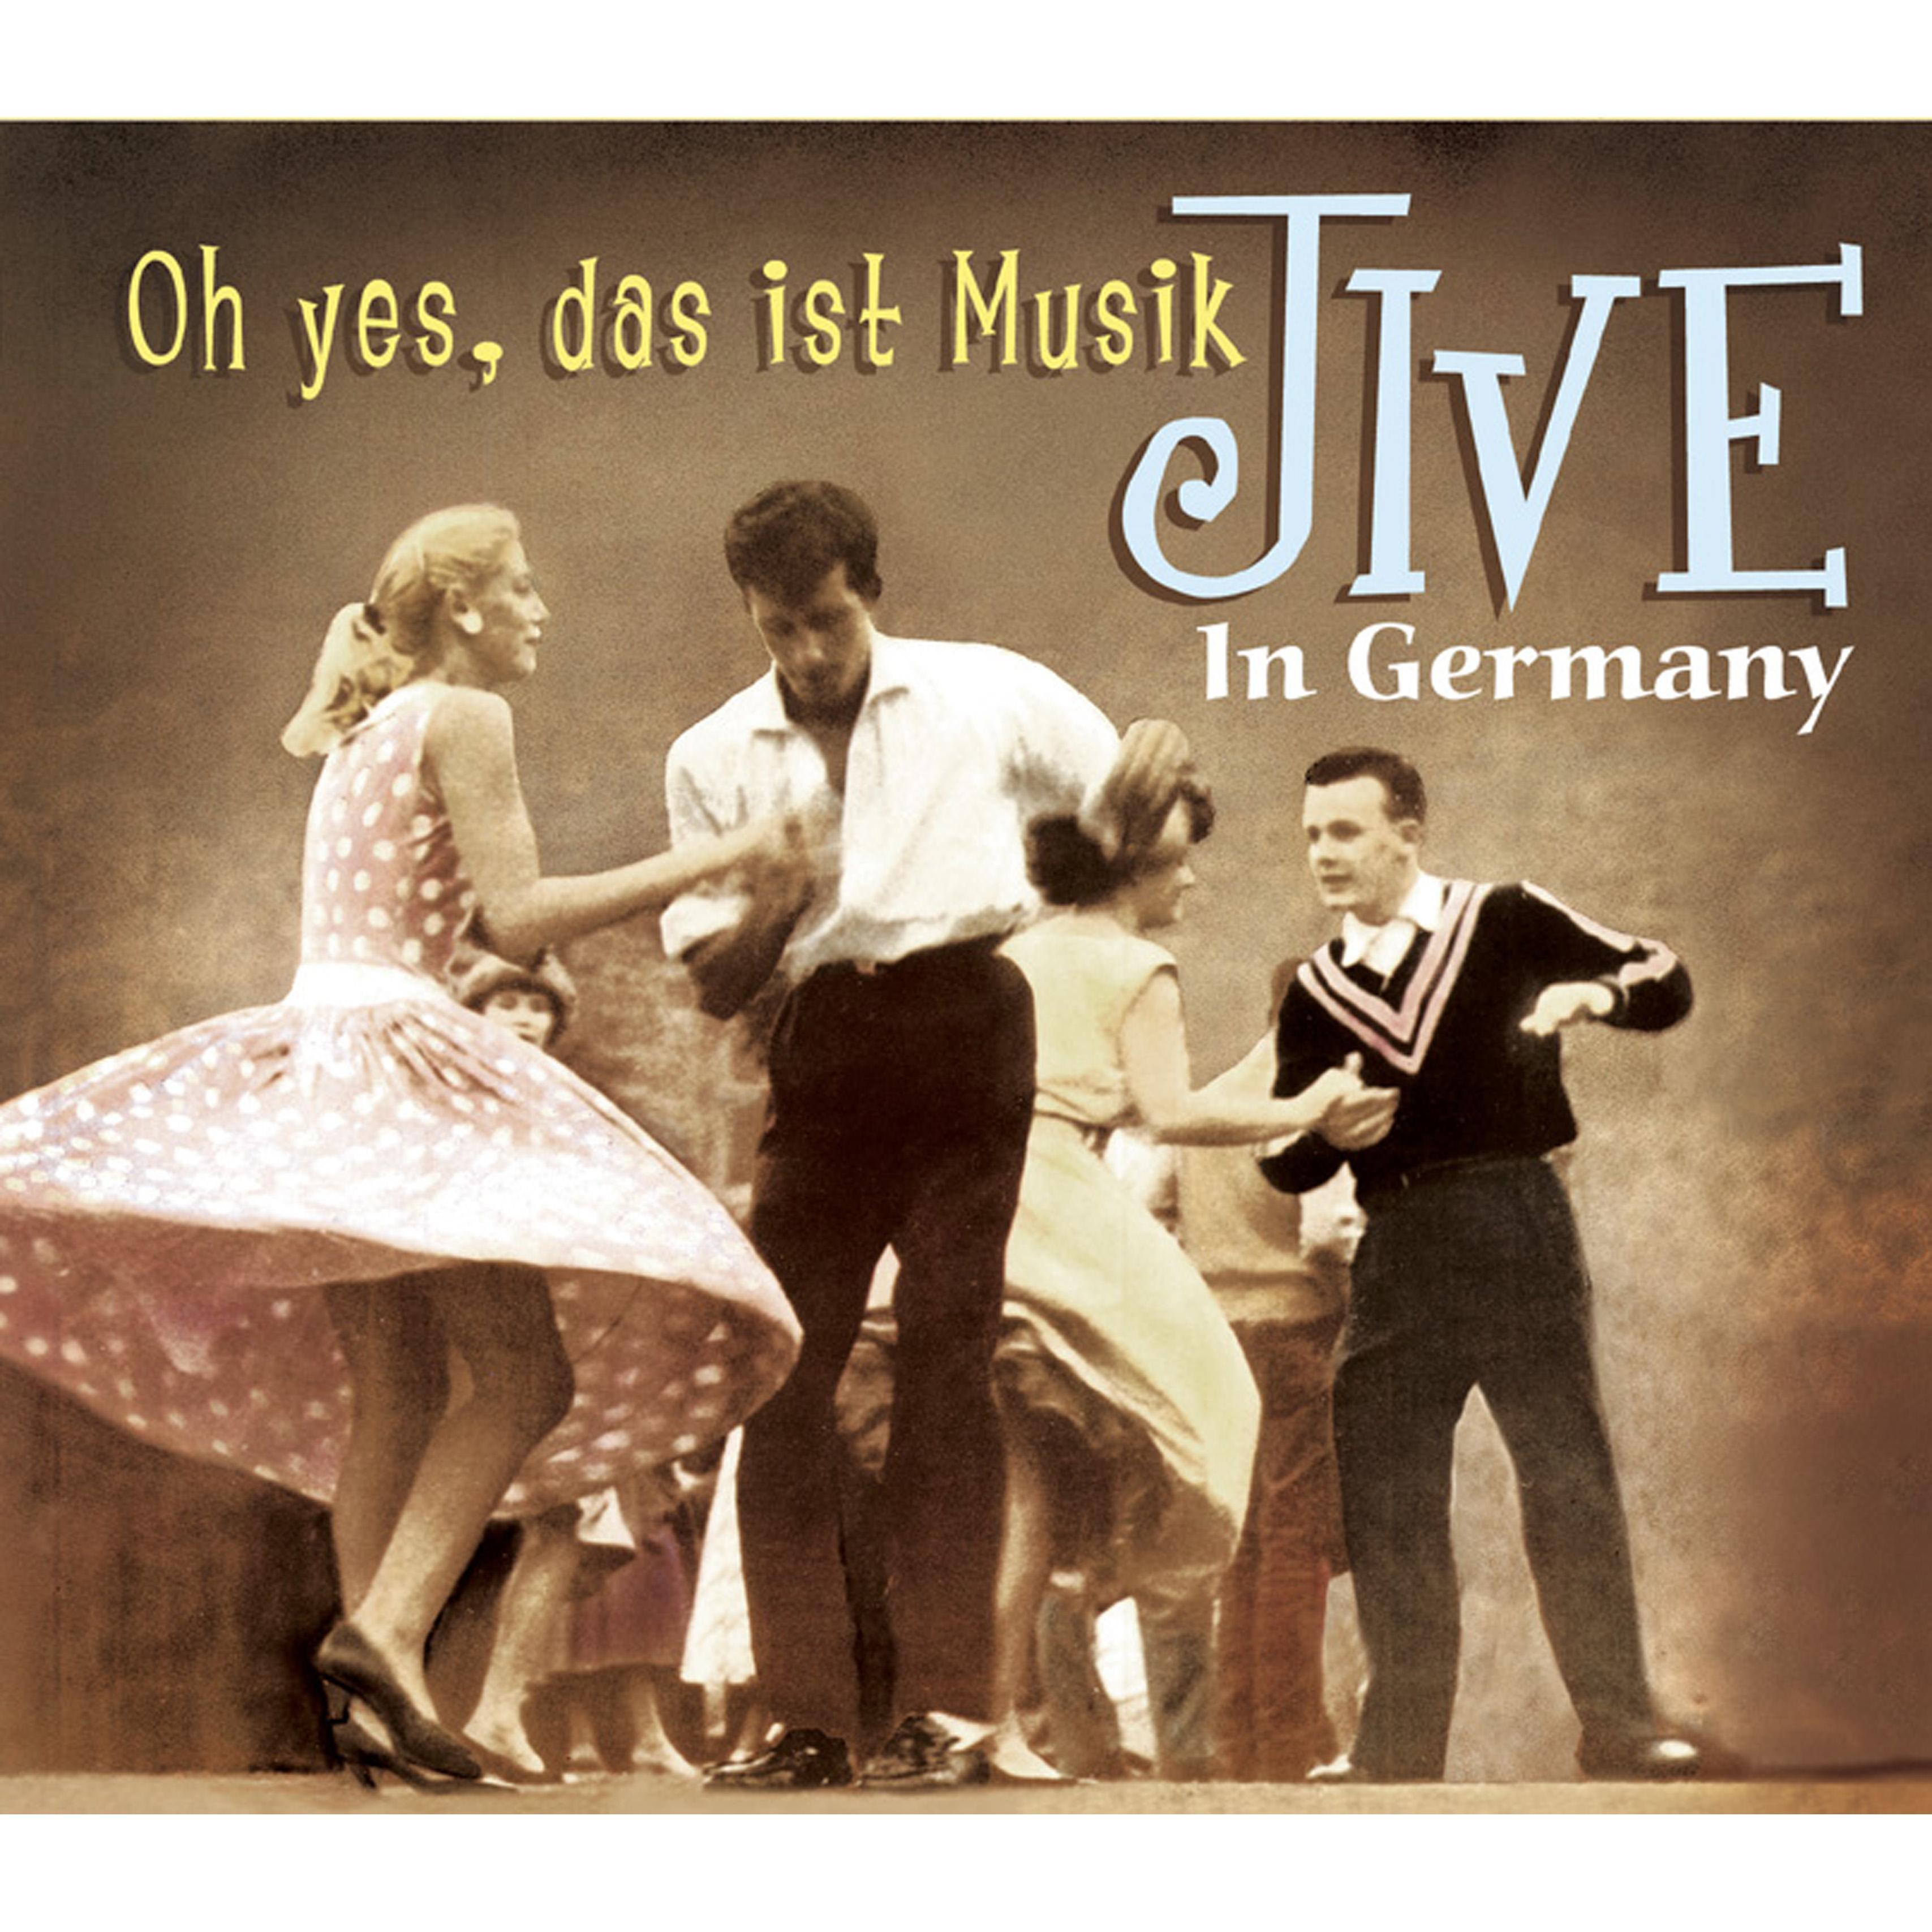 Jive in Germany: Oh Yes, das ist Musik